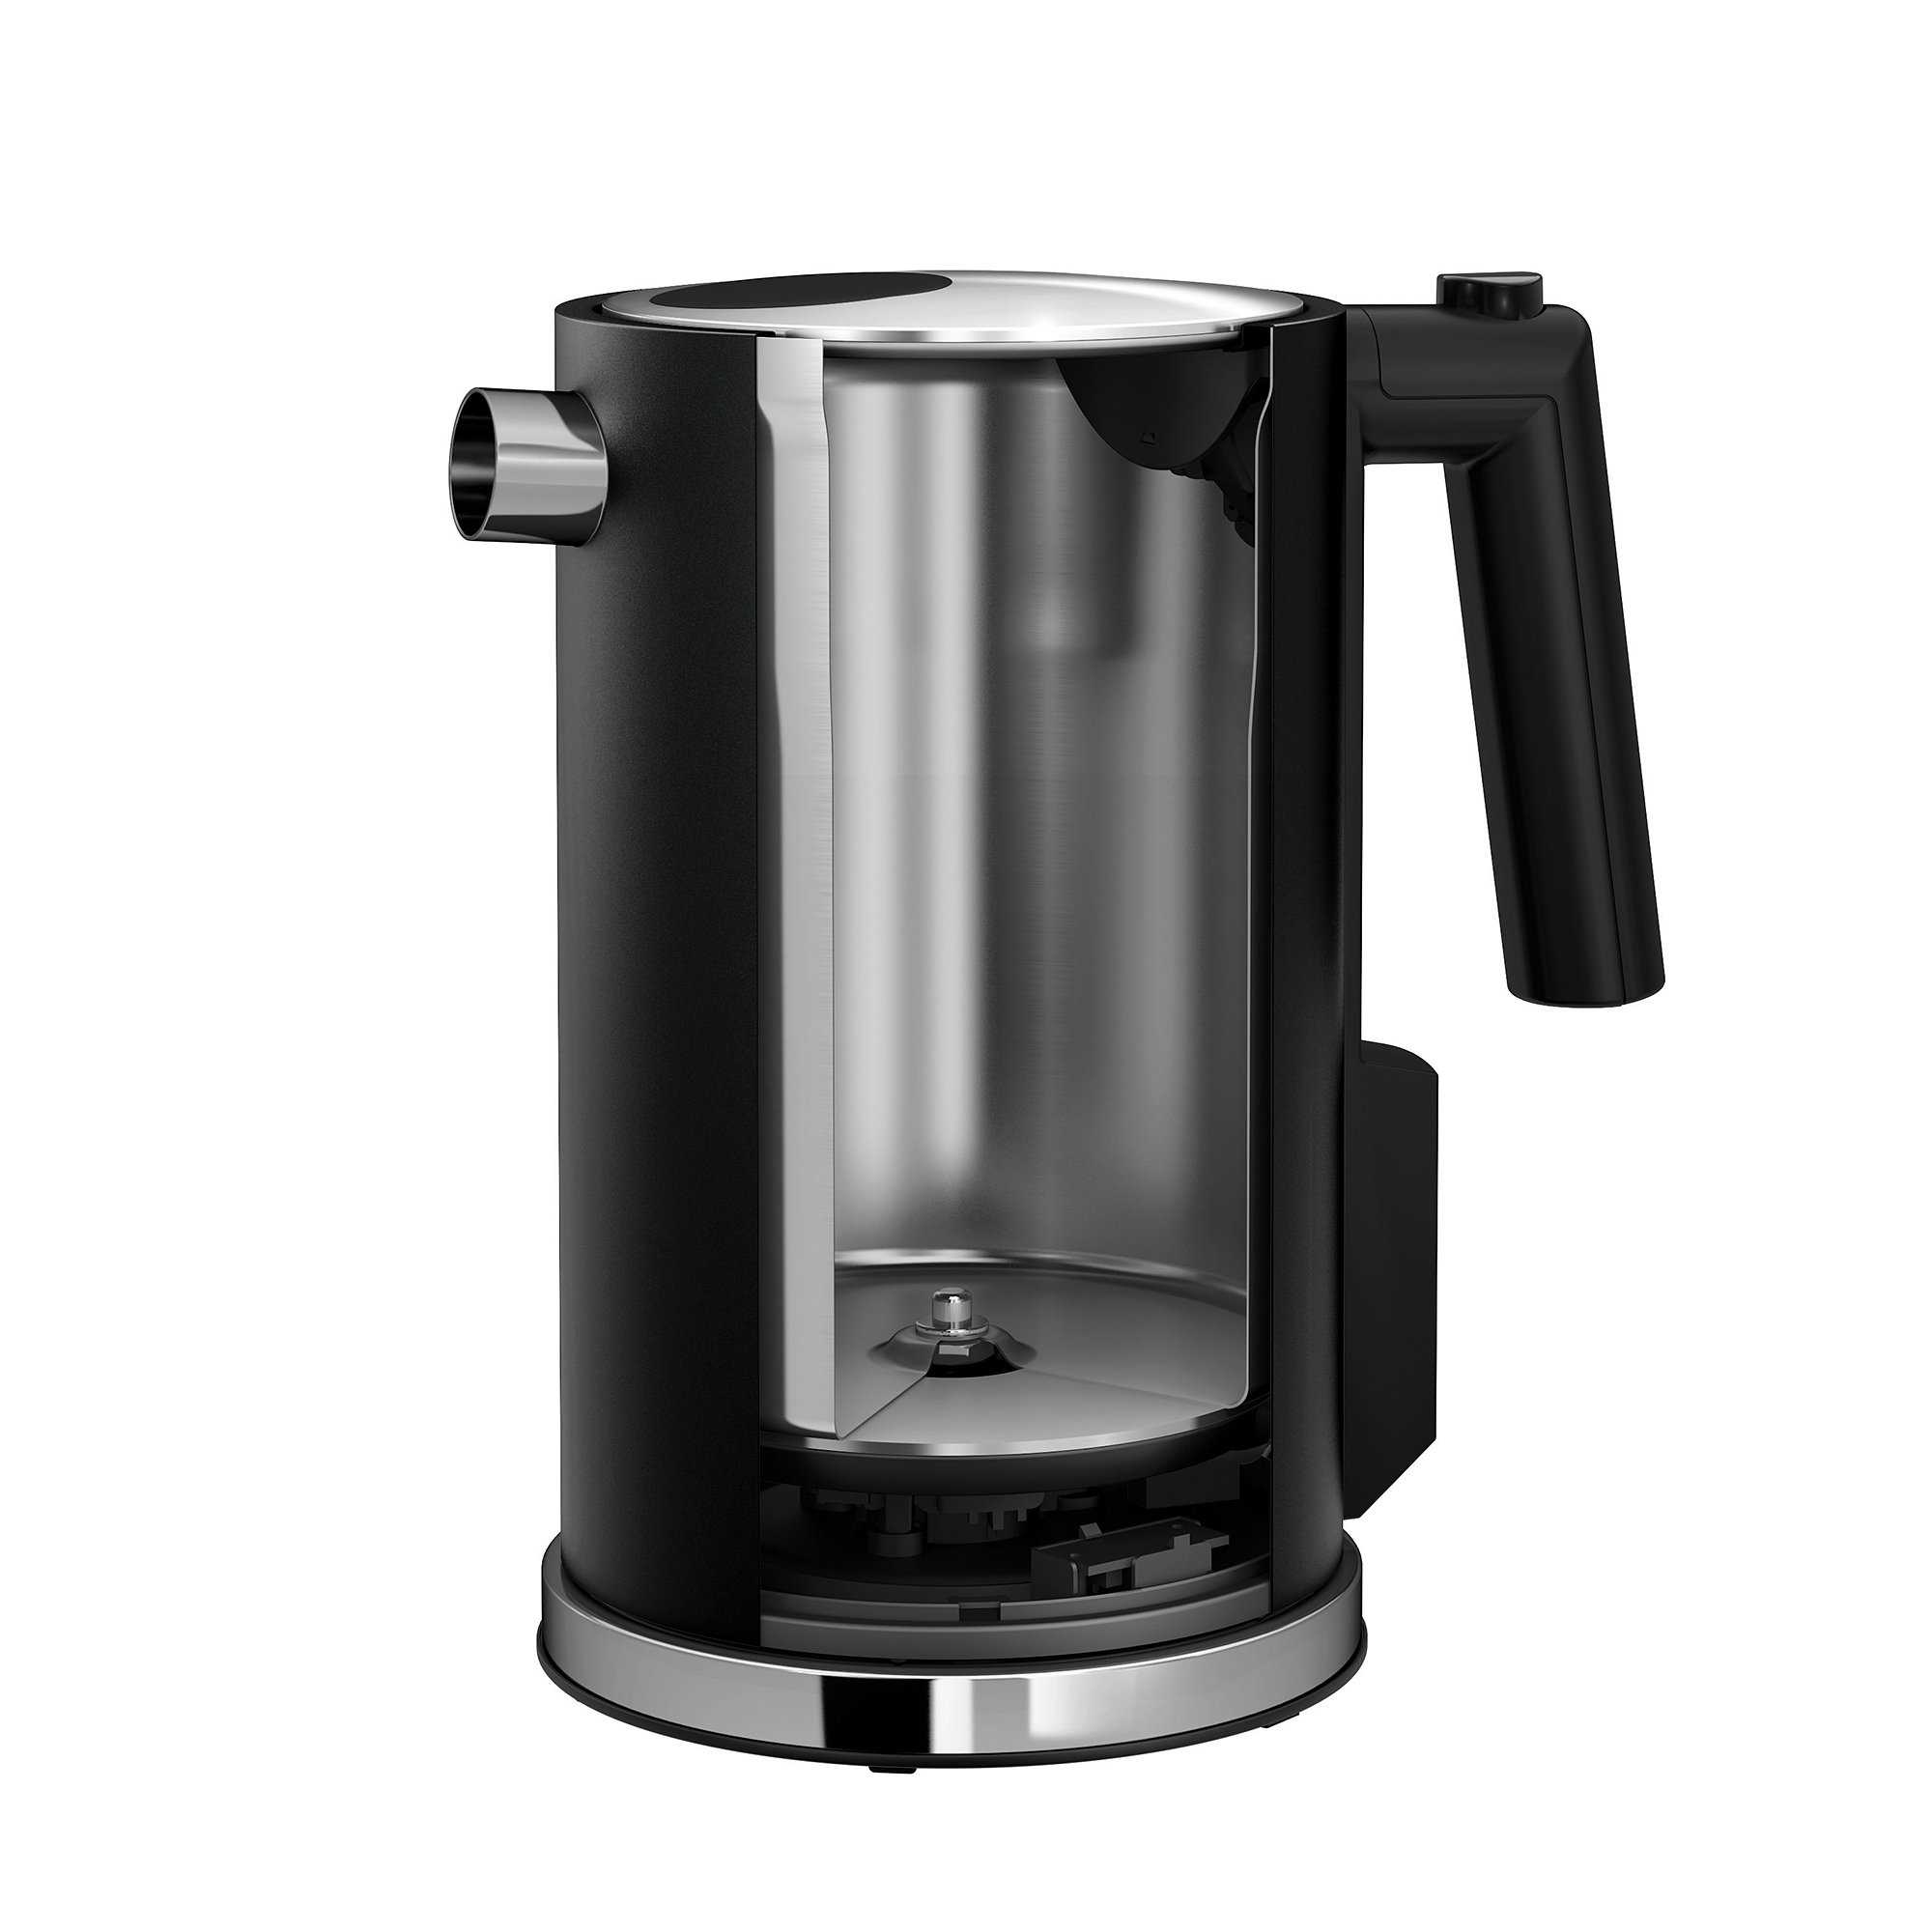 Graef - Stainless Steel Electric Kettle WK 902